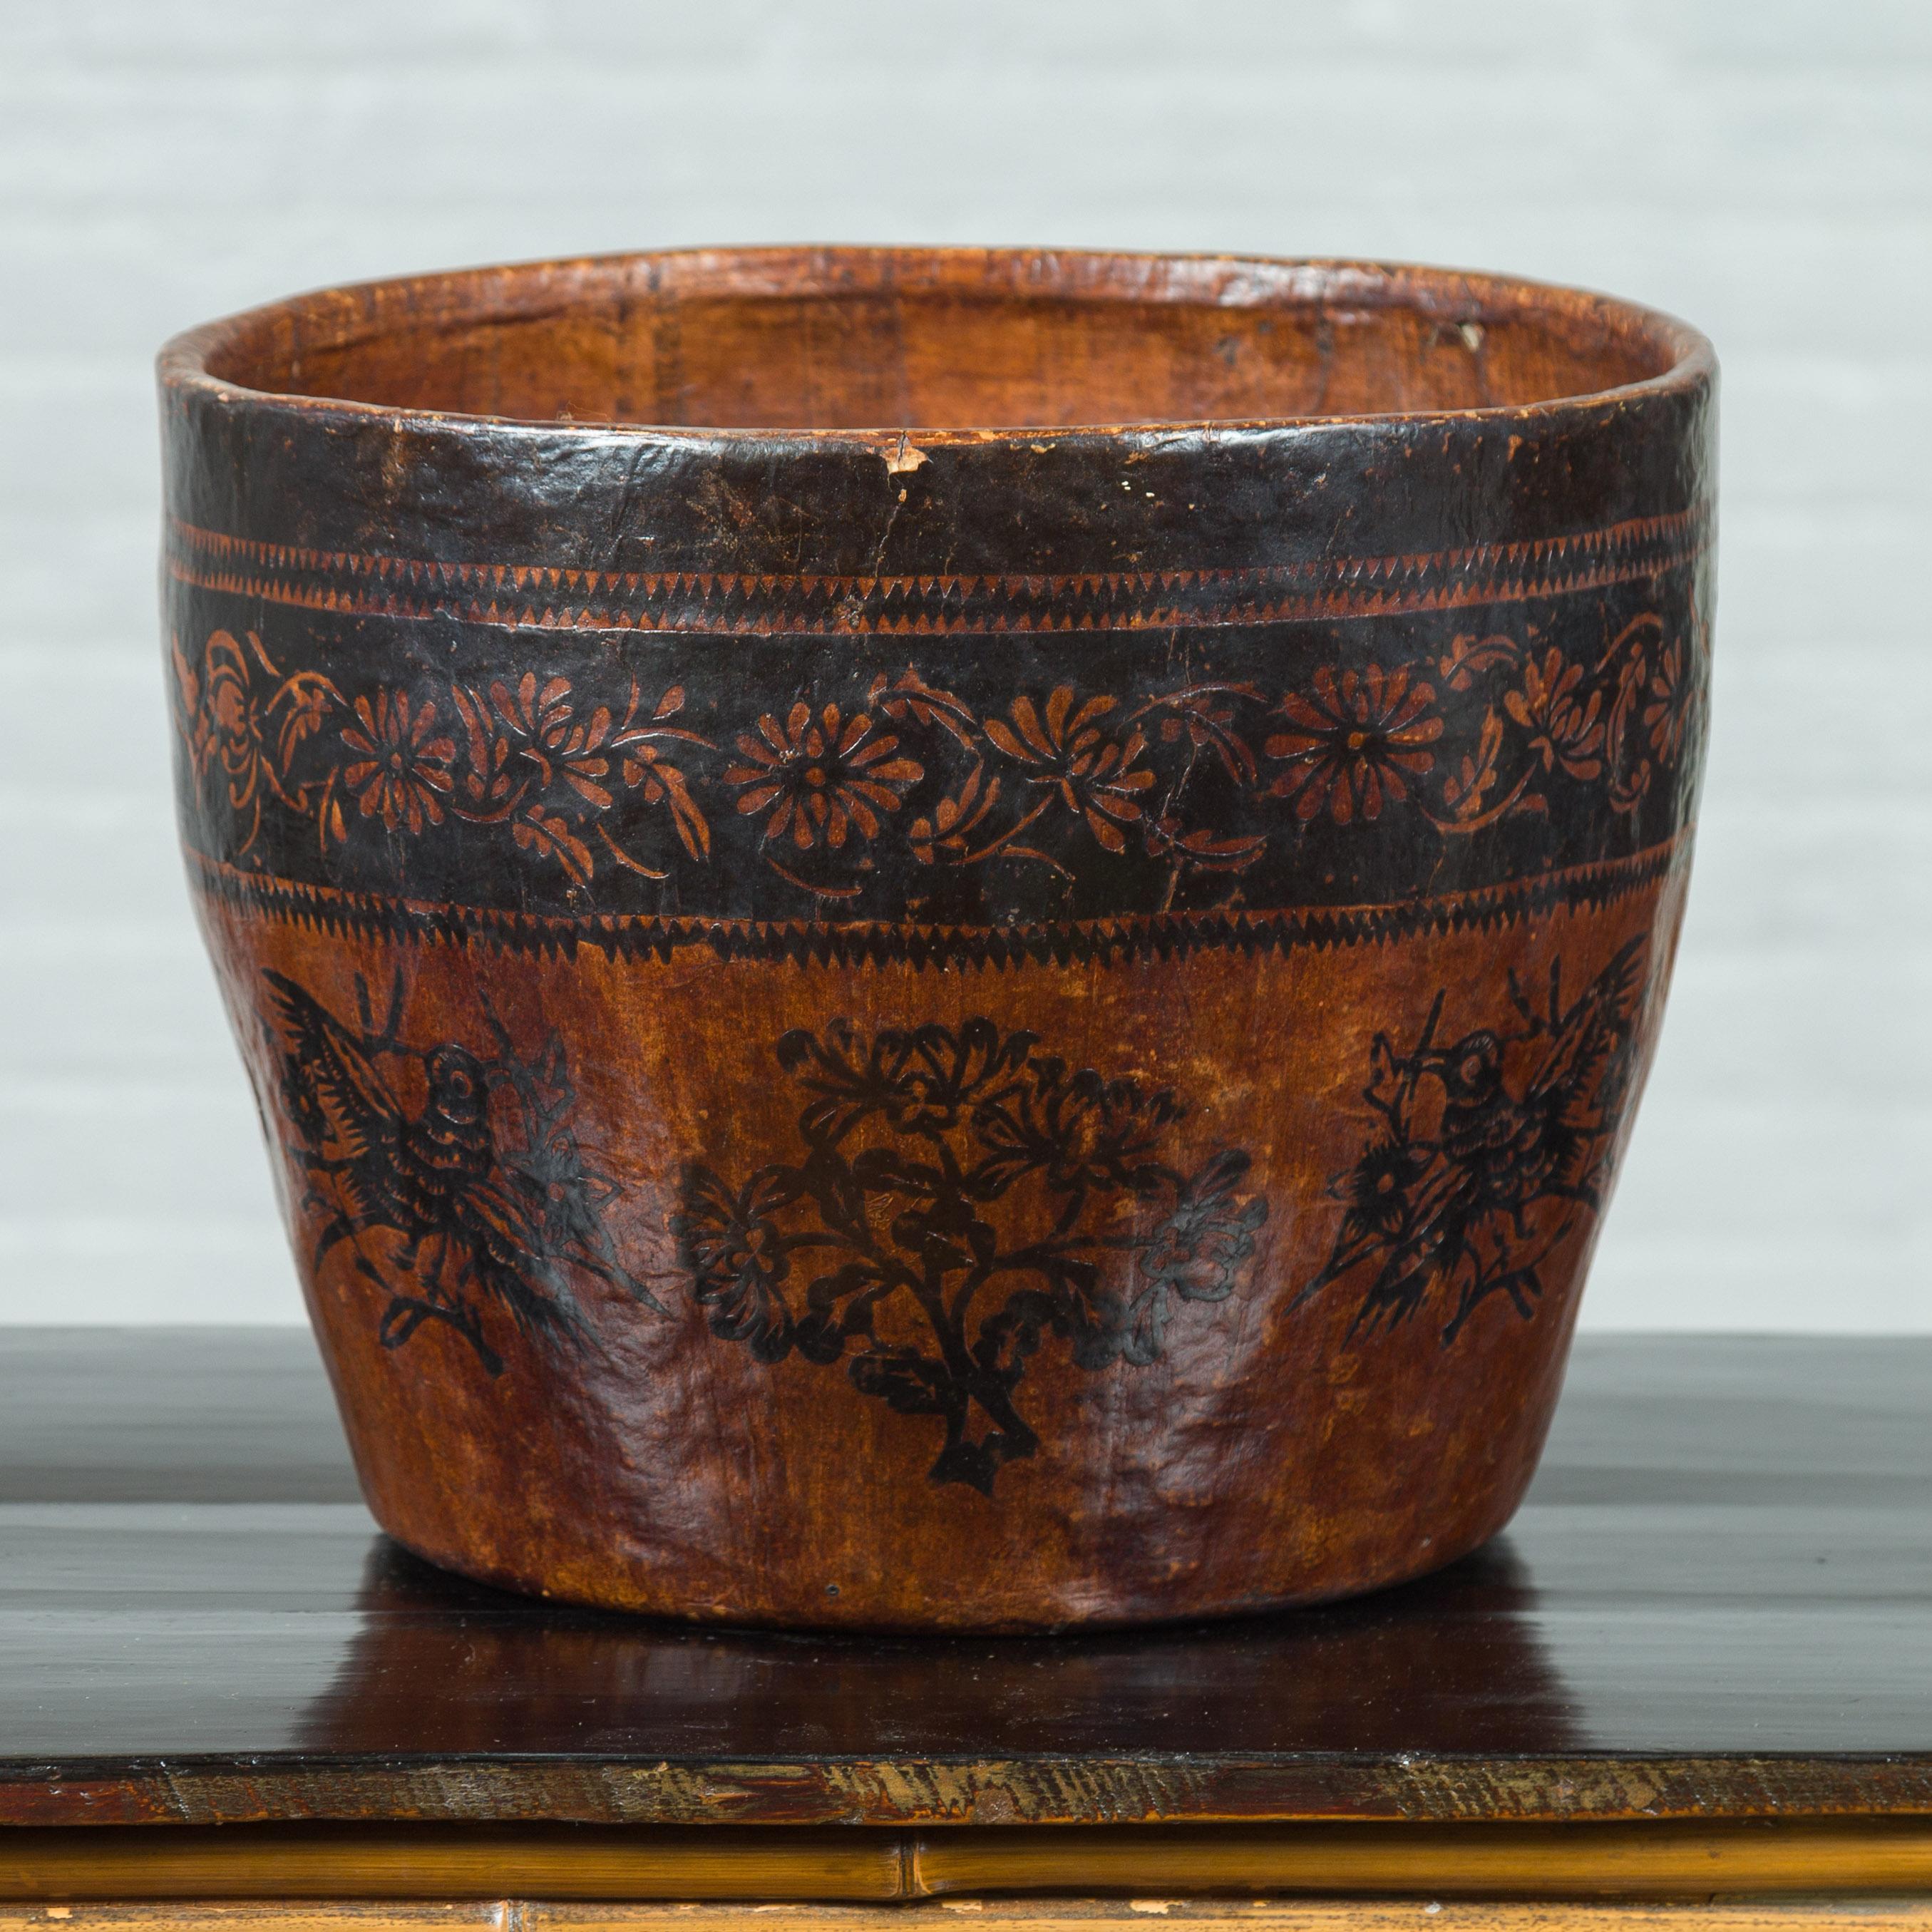 20th Century Chinese Brown and Black Papier-Mâché Basket with Floral Frieze and Bird Motifs